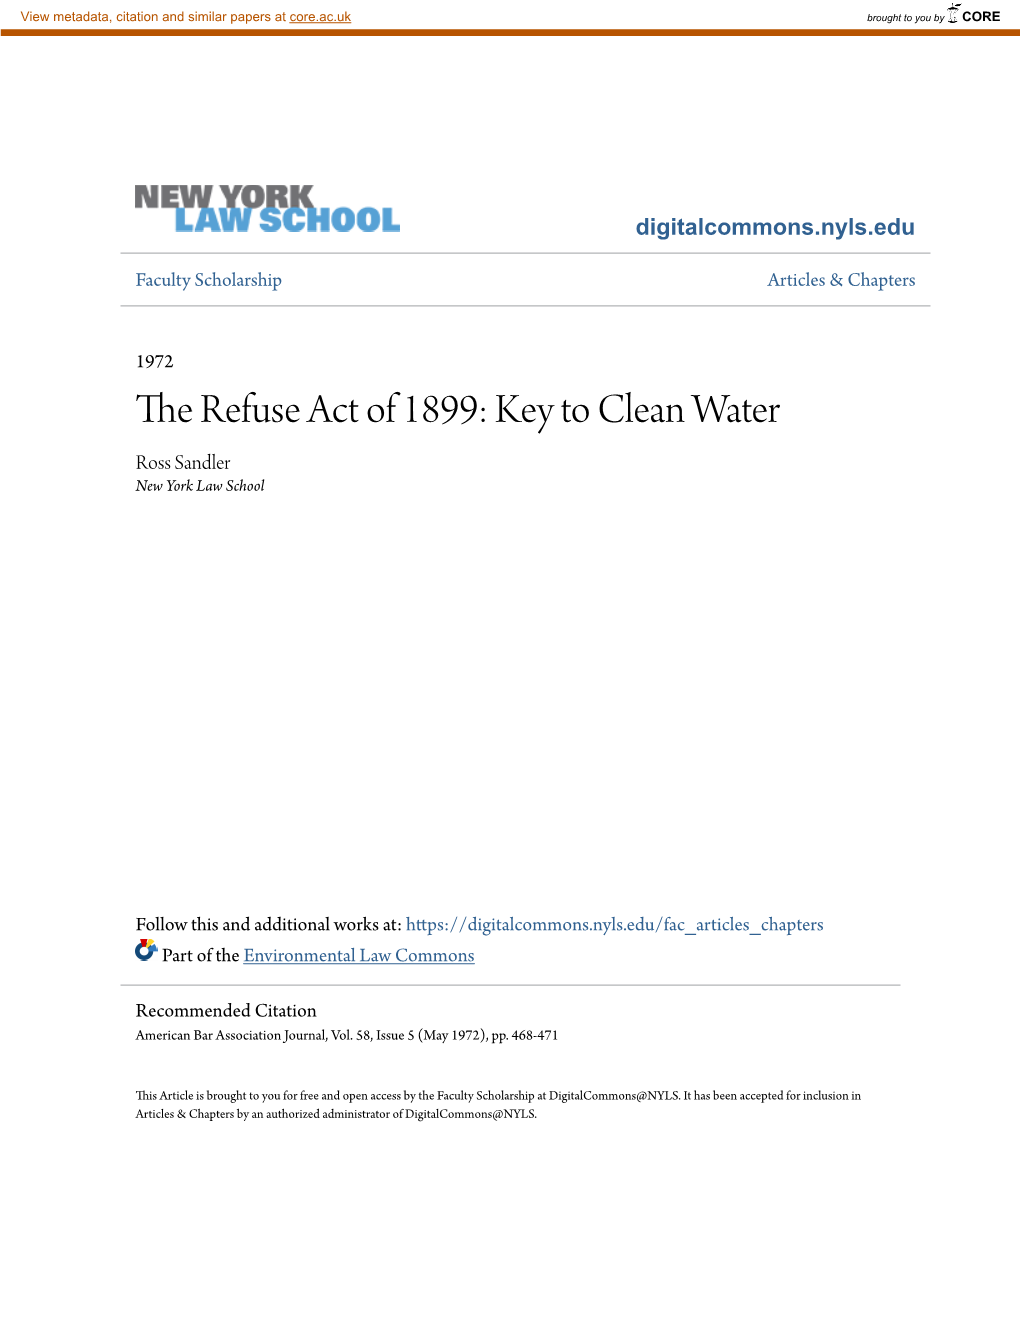 The Refuse Act of 1899: Key to Clean Water Ross Sandler New York Law School